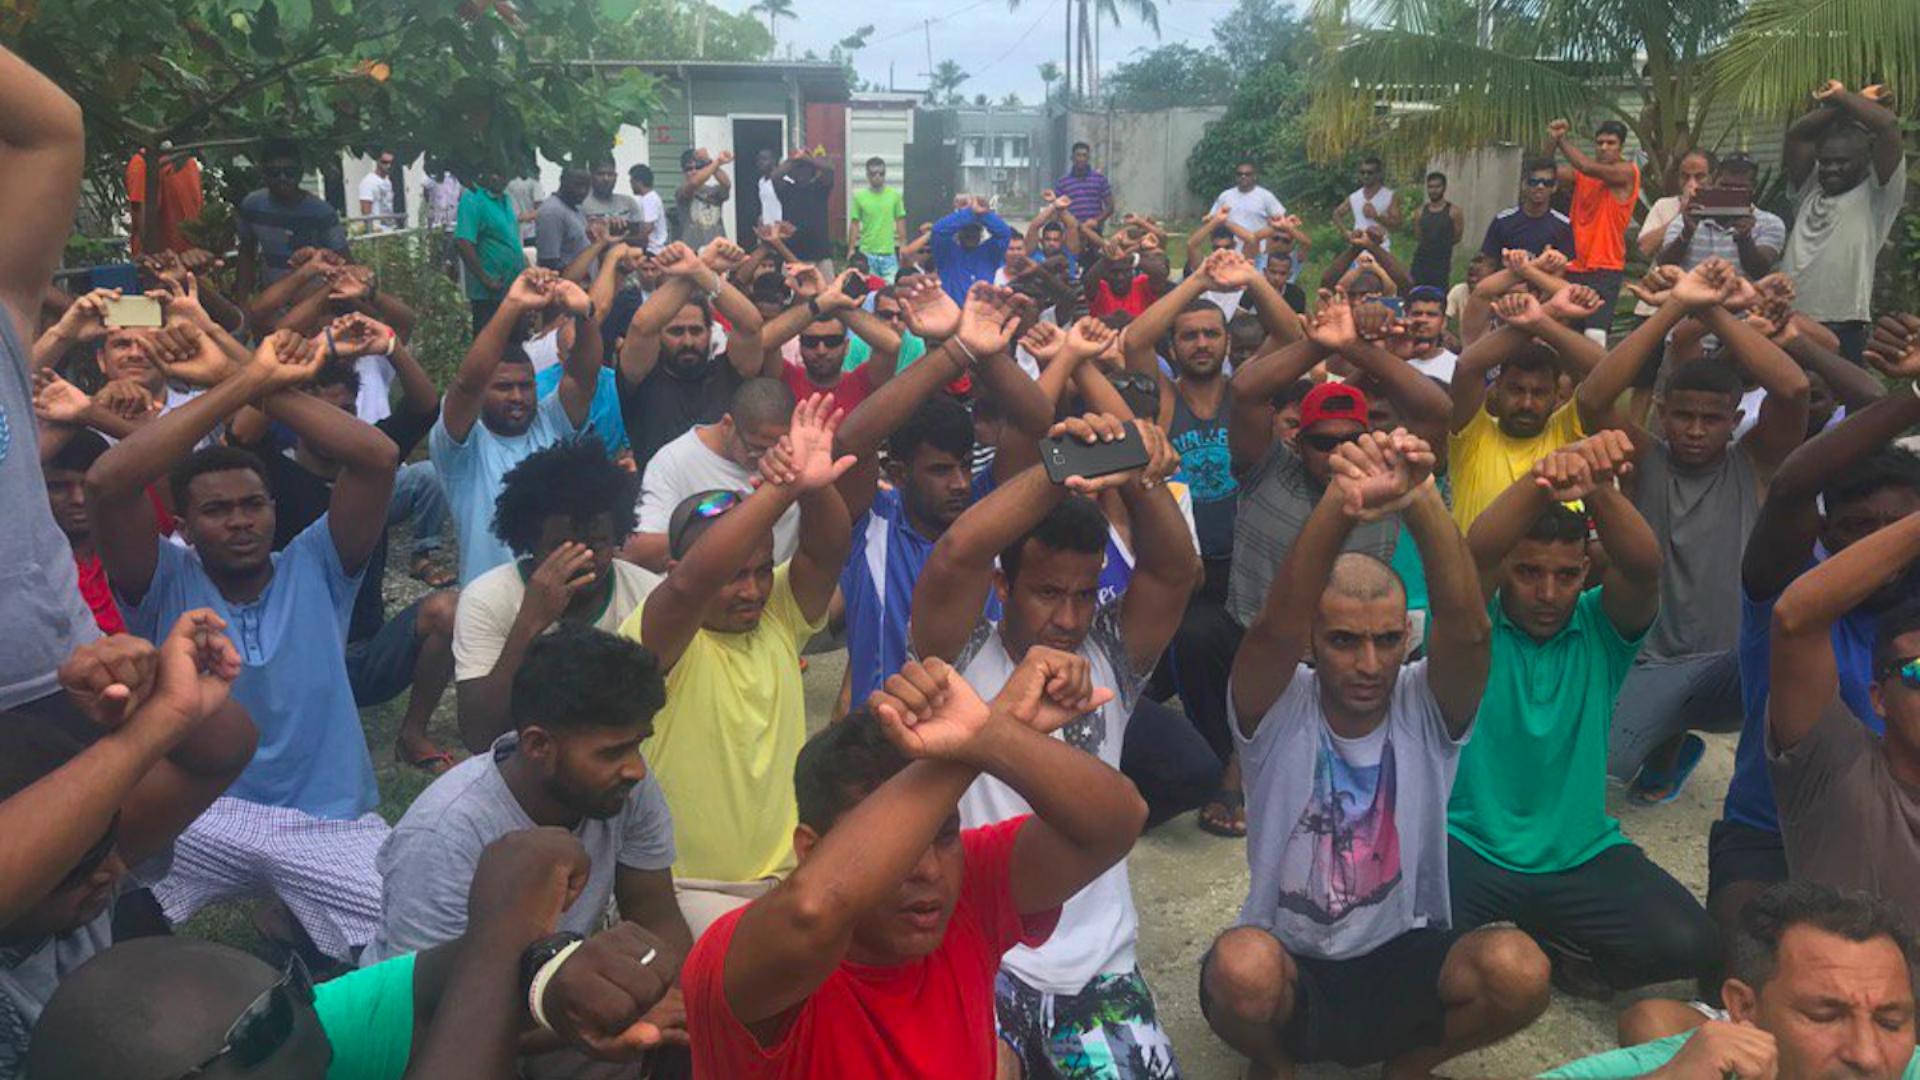 Some 600 asylum seekers at the Manus Island detention center in Papua New Guinea have refused to leave after Australian and Papua New Guinean officials formally shut down the camp and cut off power at the camp on October 31st.